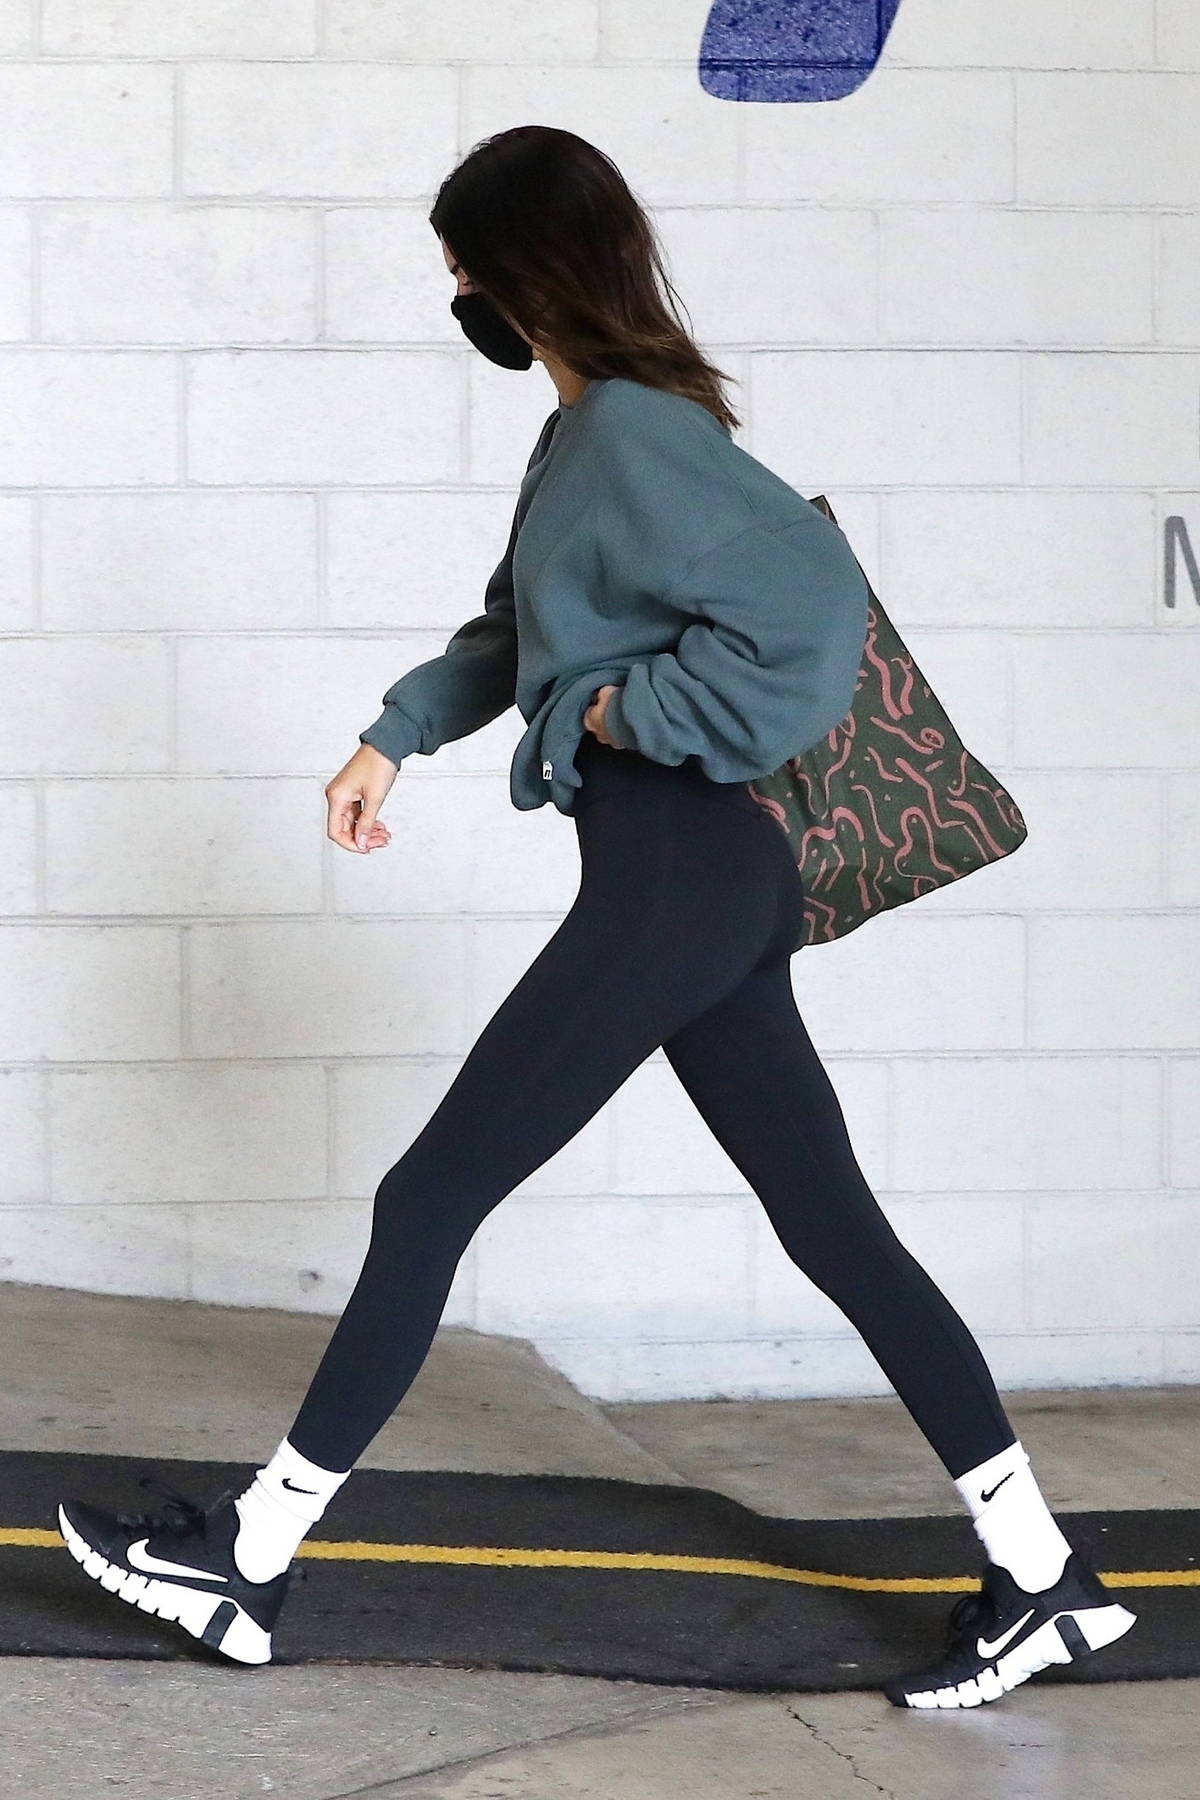 https://www.celebsfirst.com/wp-content/uploads/2021/04/kendall-jenner-sports-an-oversized-sweatshirt-with-leggings-as-she-heads-for-a-workout-session-in-west-hollywood-california-220421_7.jpg